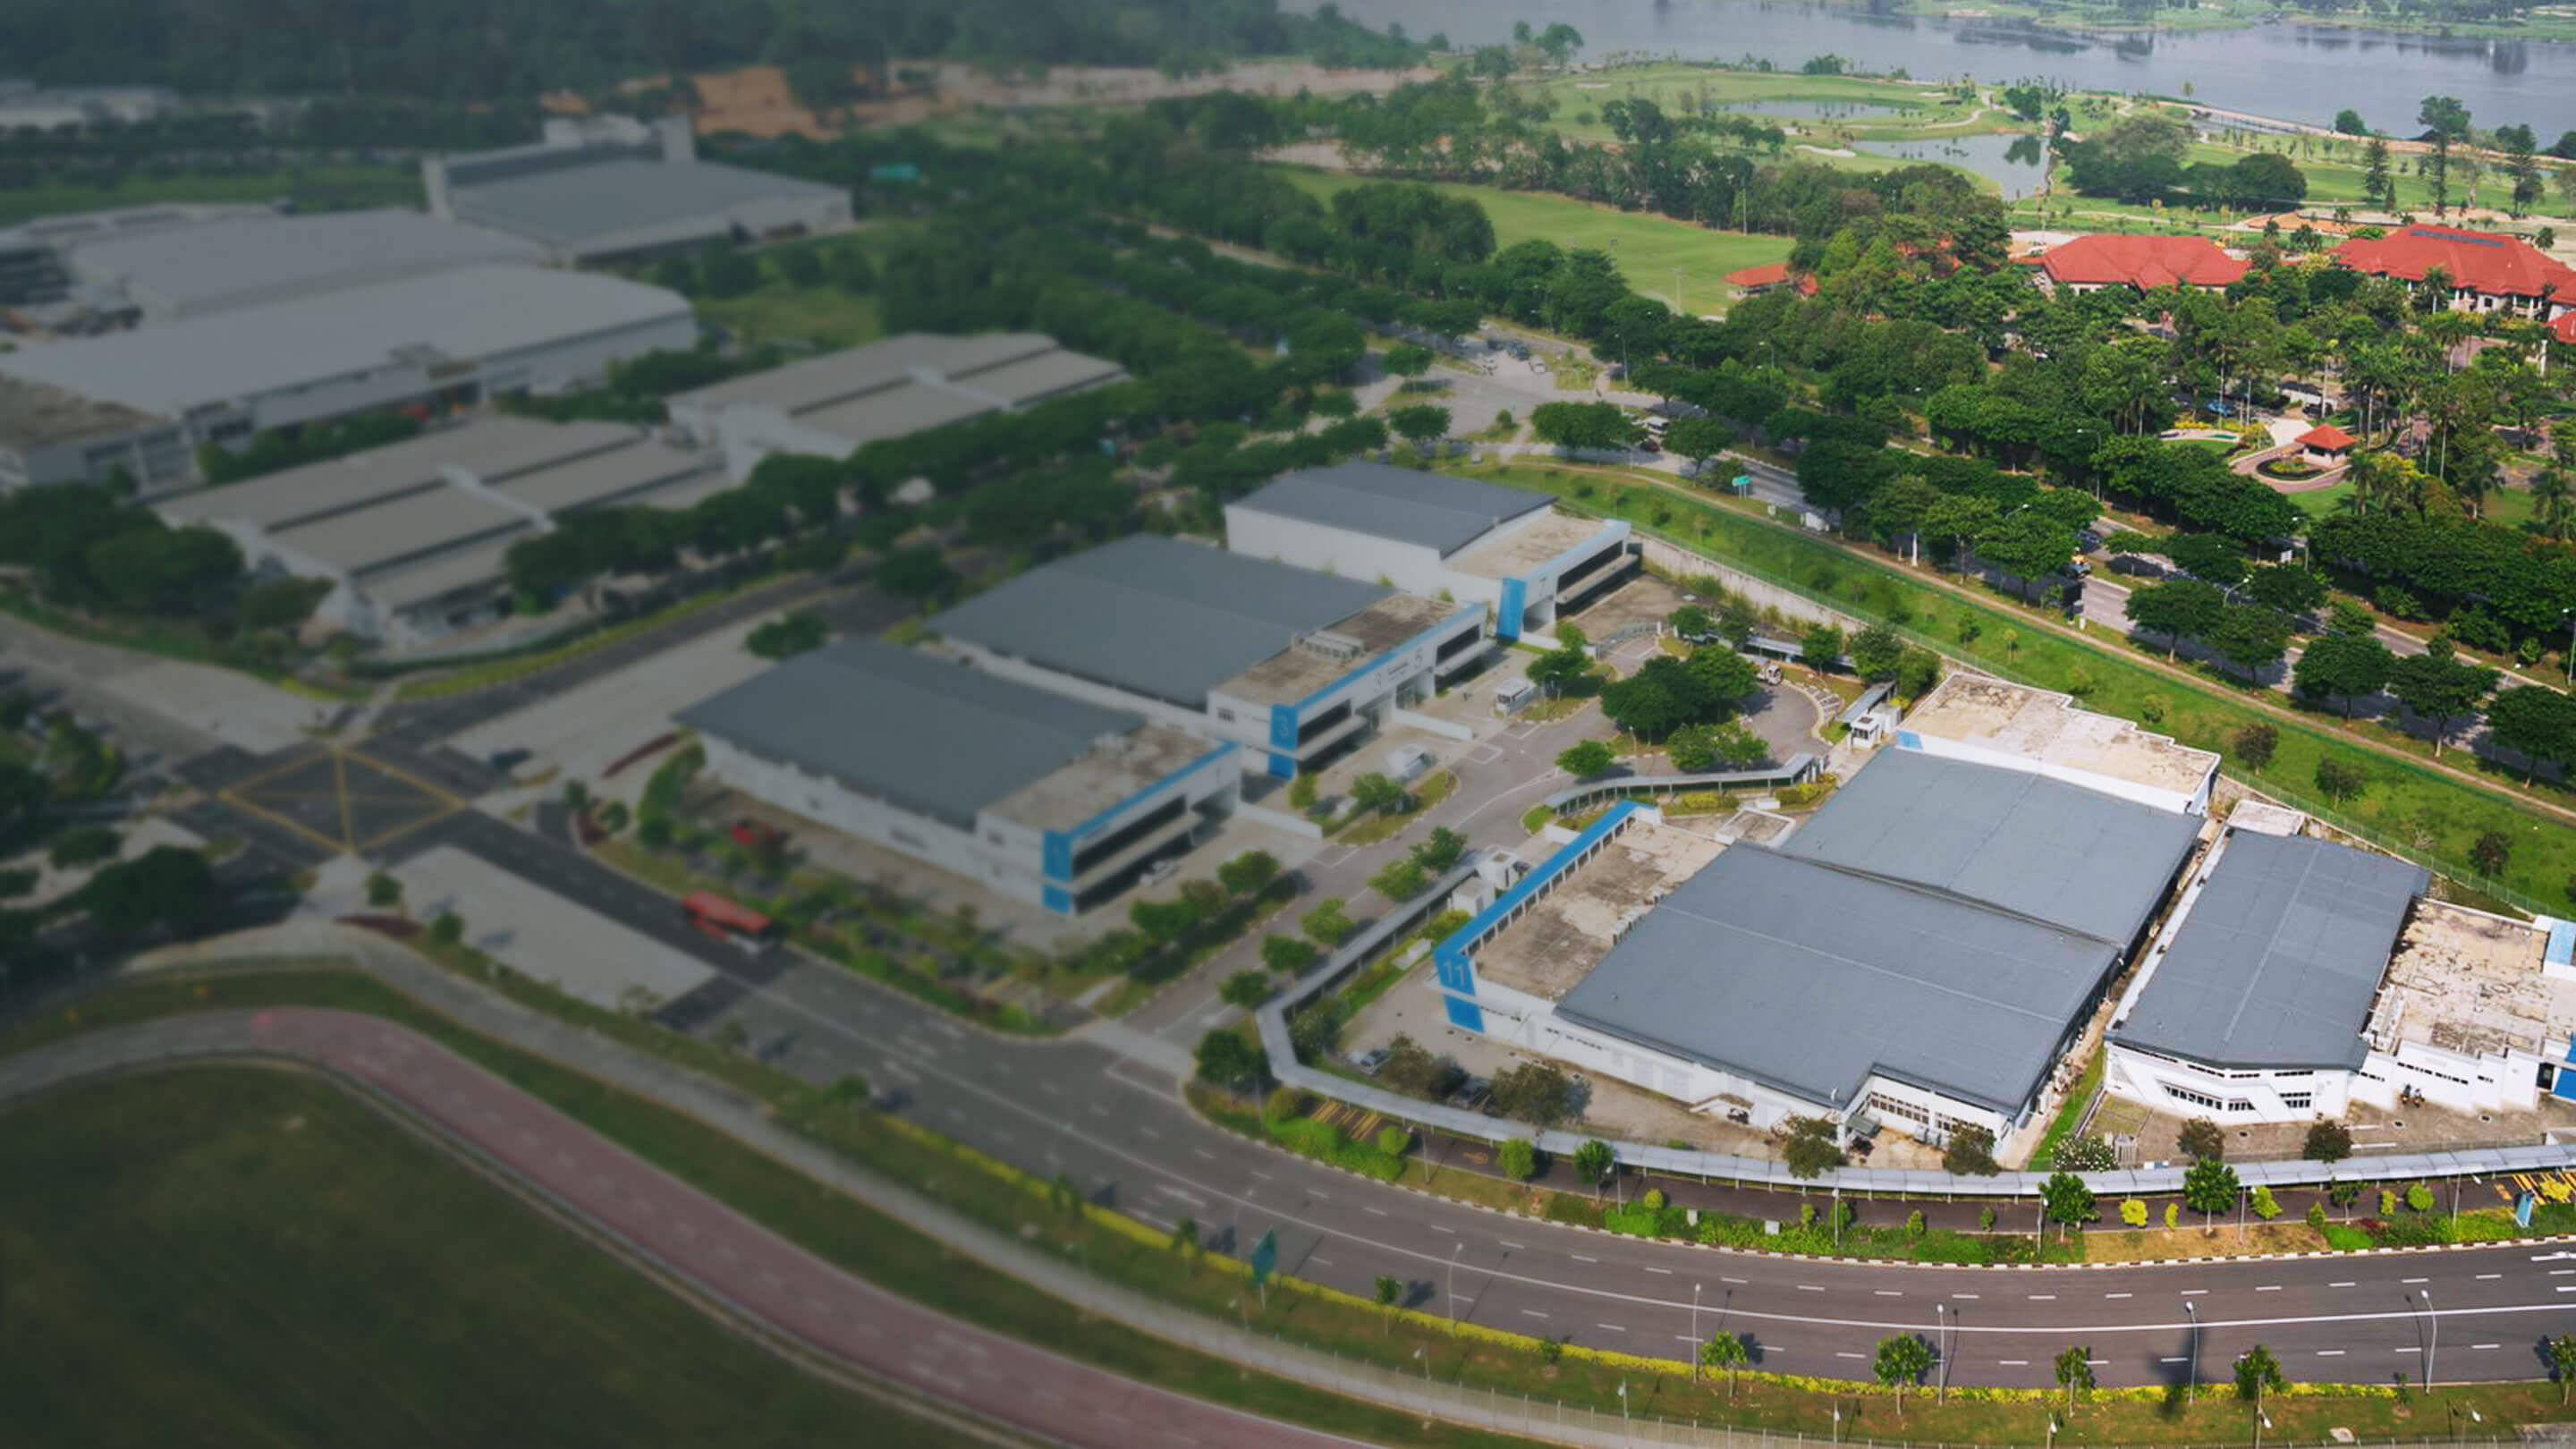 An overview of the companies at Seletar Aerospace Park